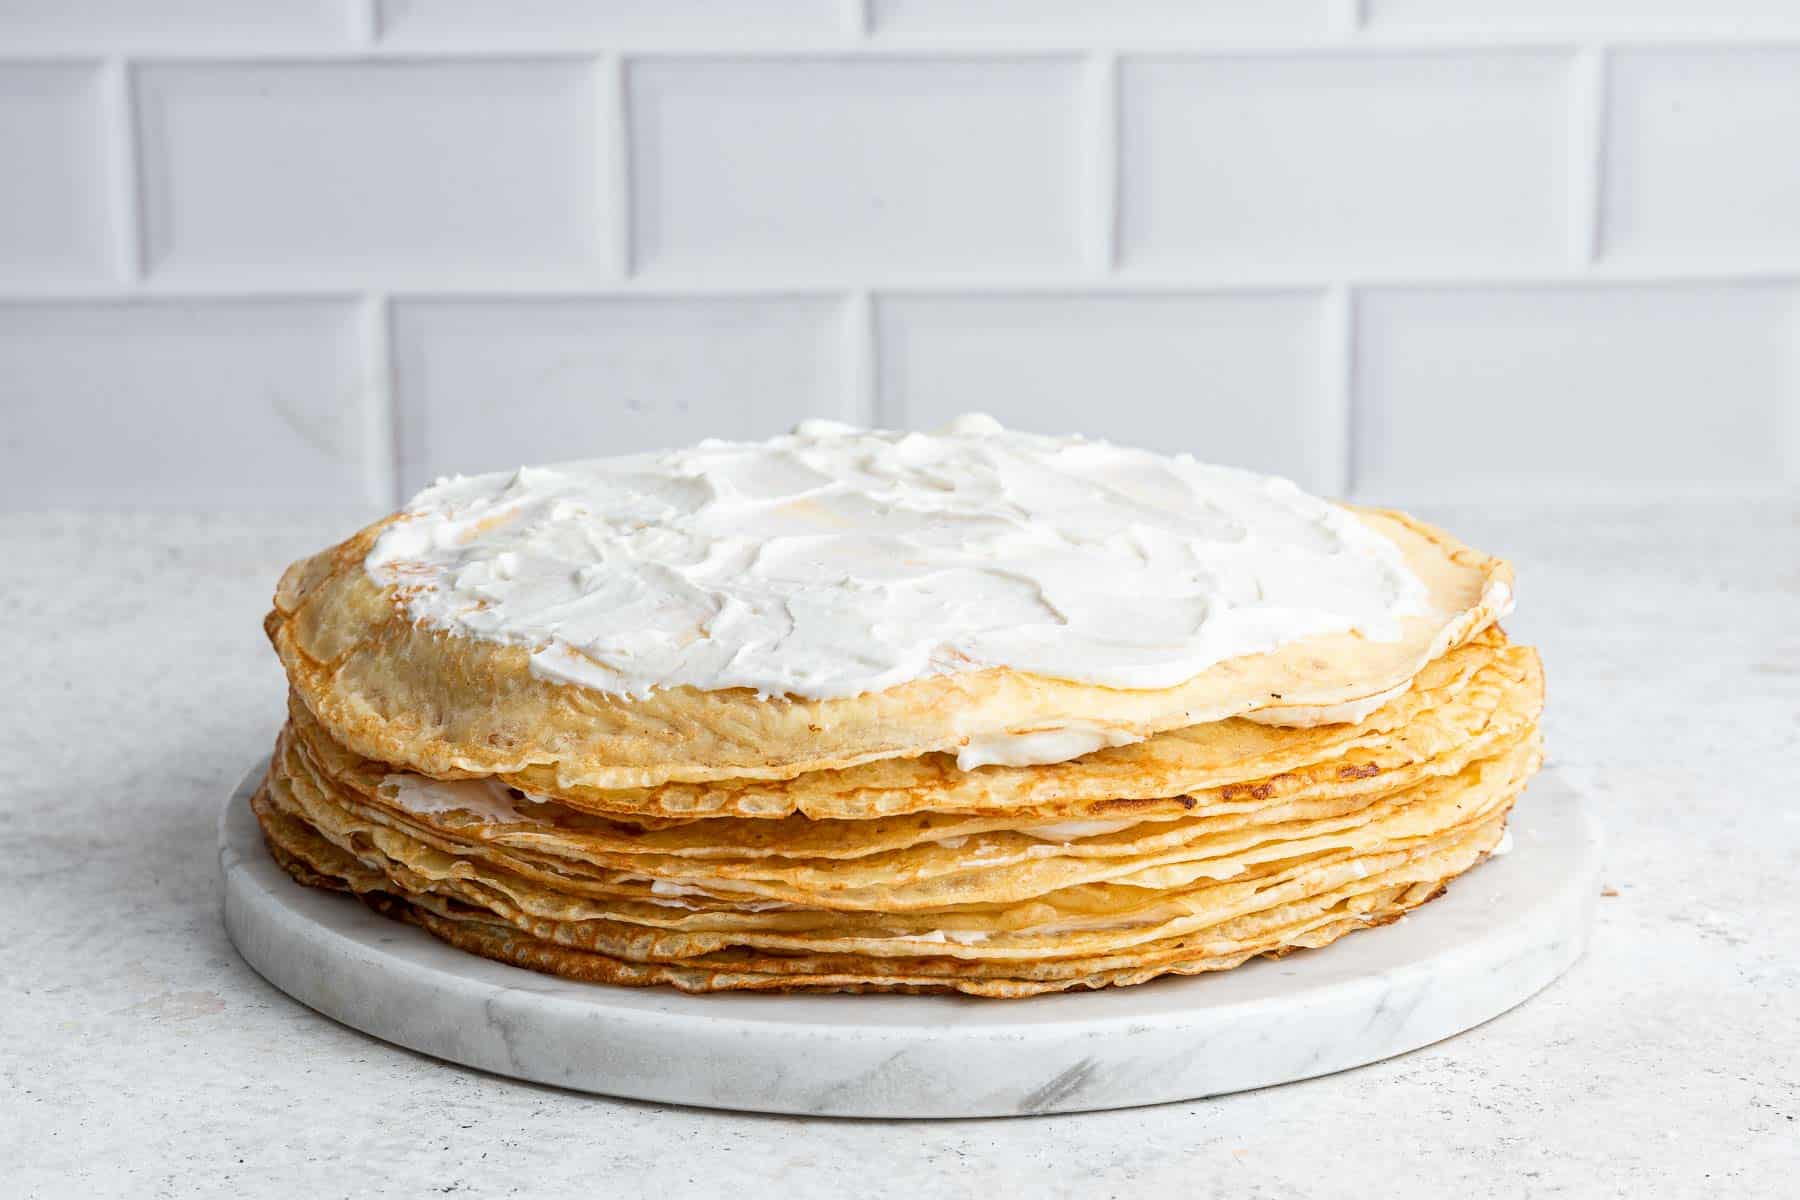 Stacked crepes with cream, making a layer cake on a plate.